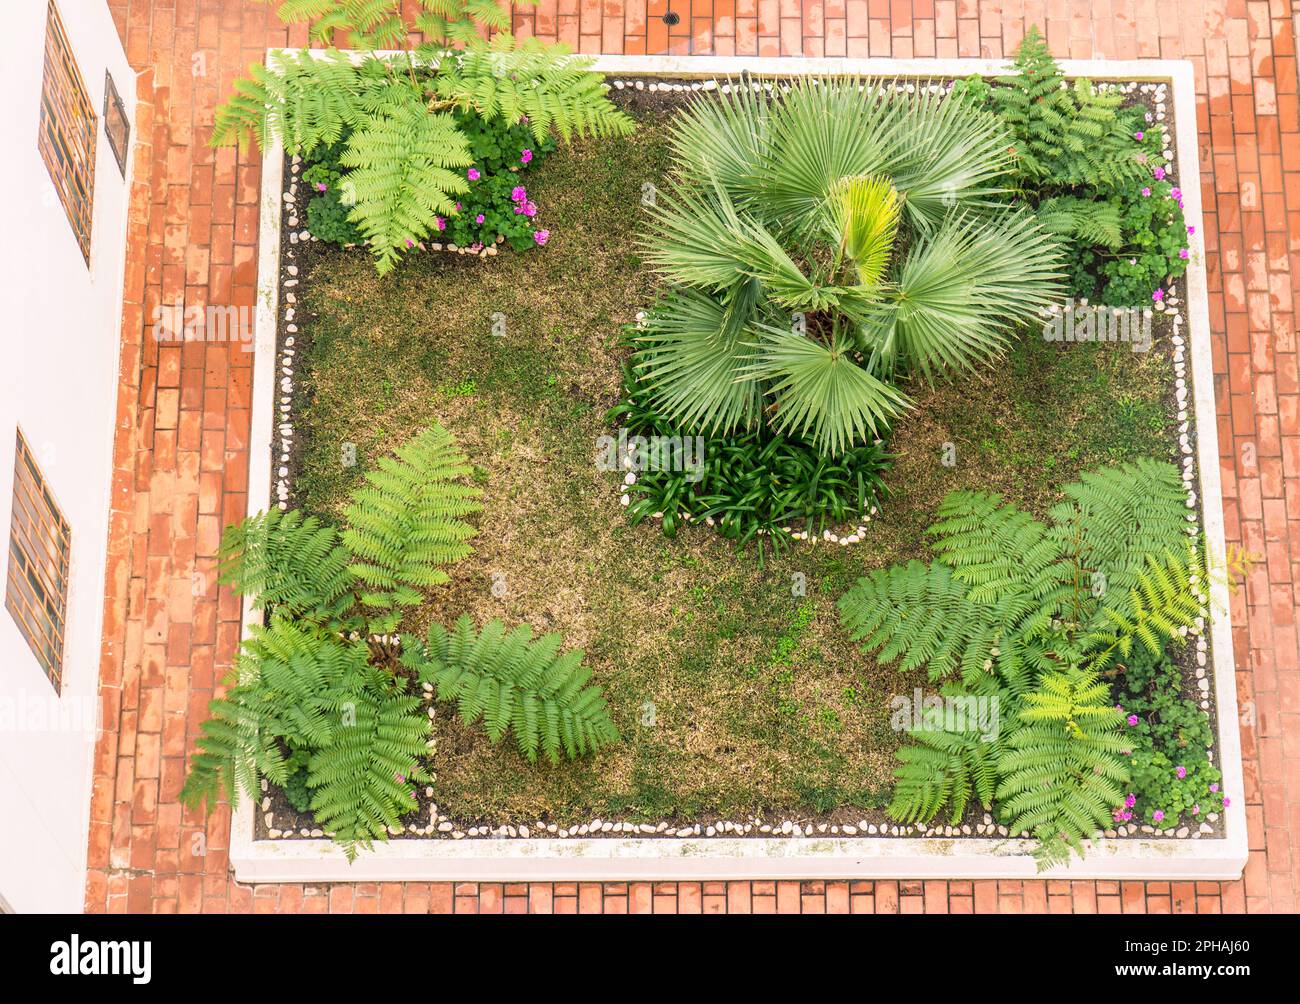 A small square shaped fern garden in the Algarve region of Portugal, viewed from above. Stock Photo